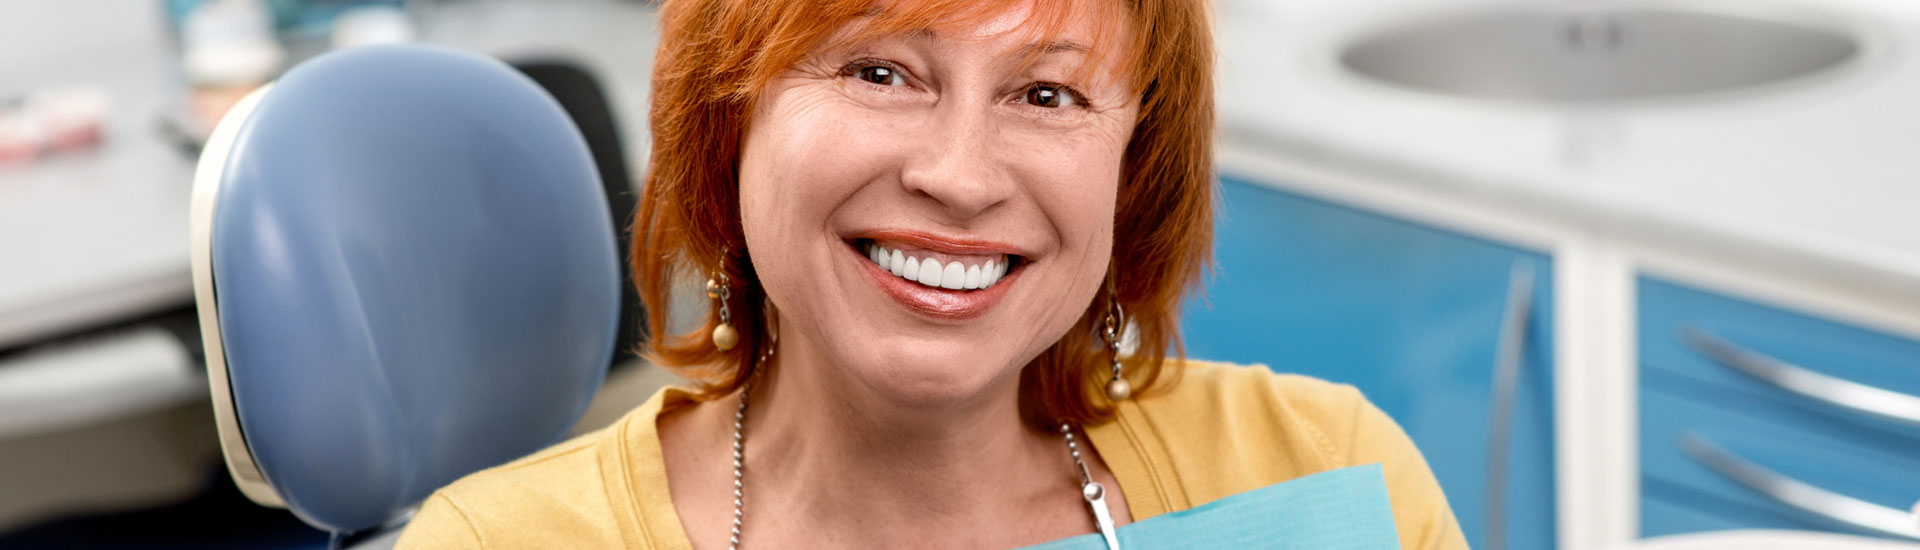 Happy woman after having dental implant treatment